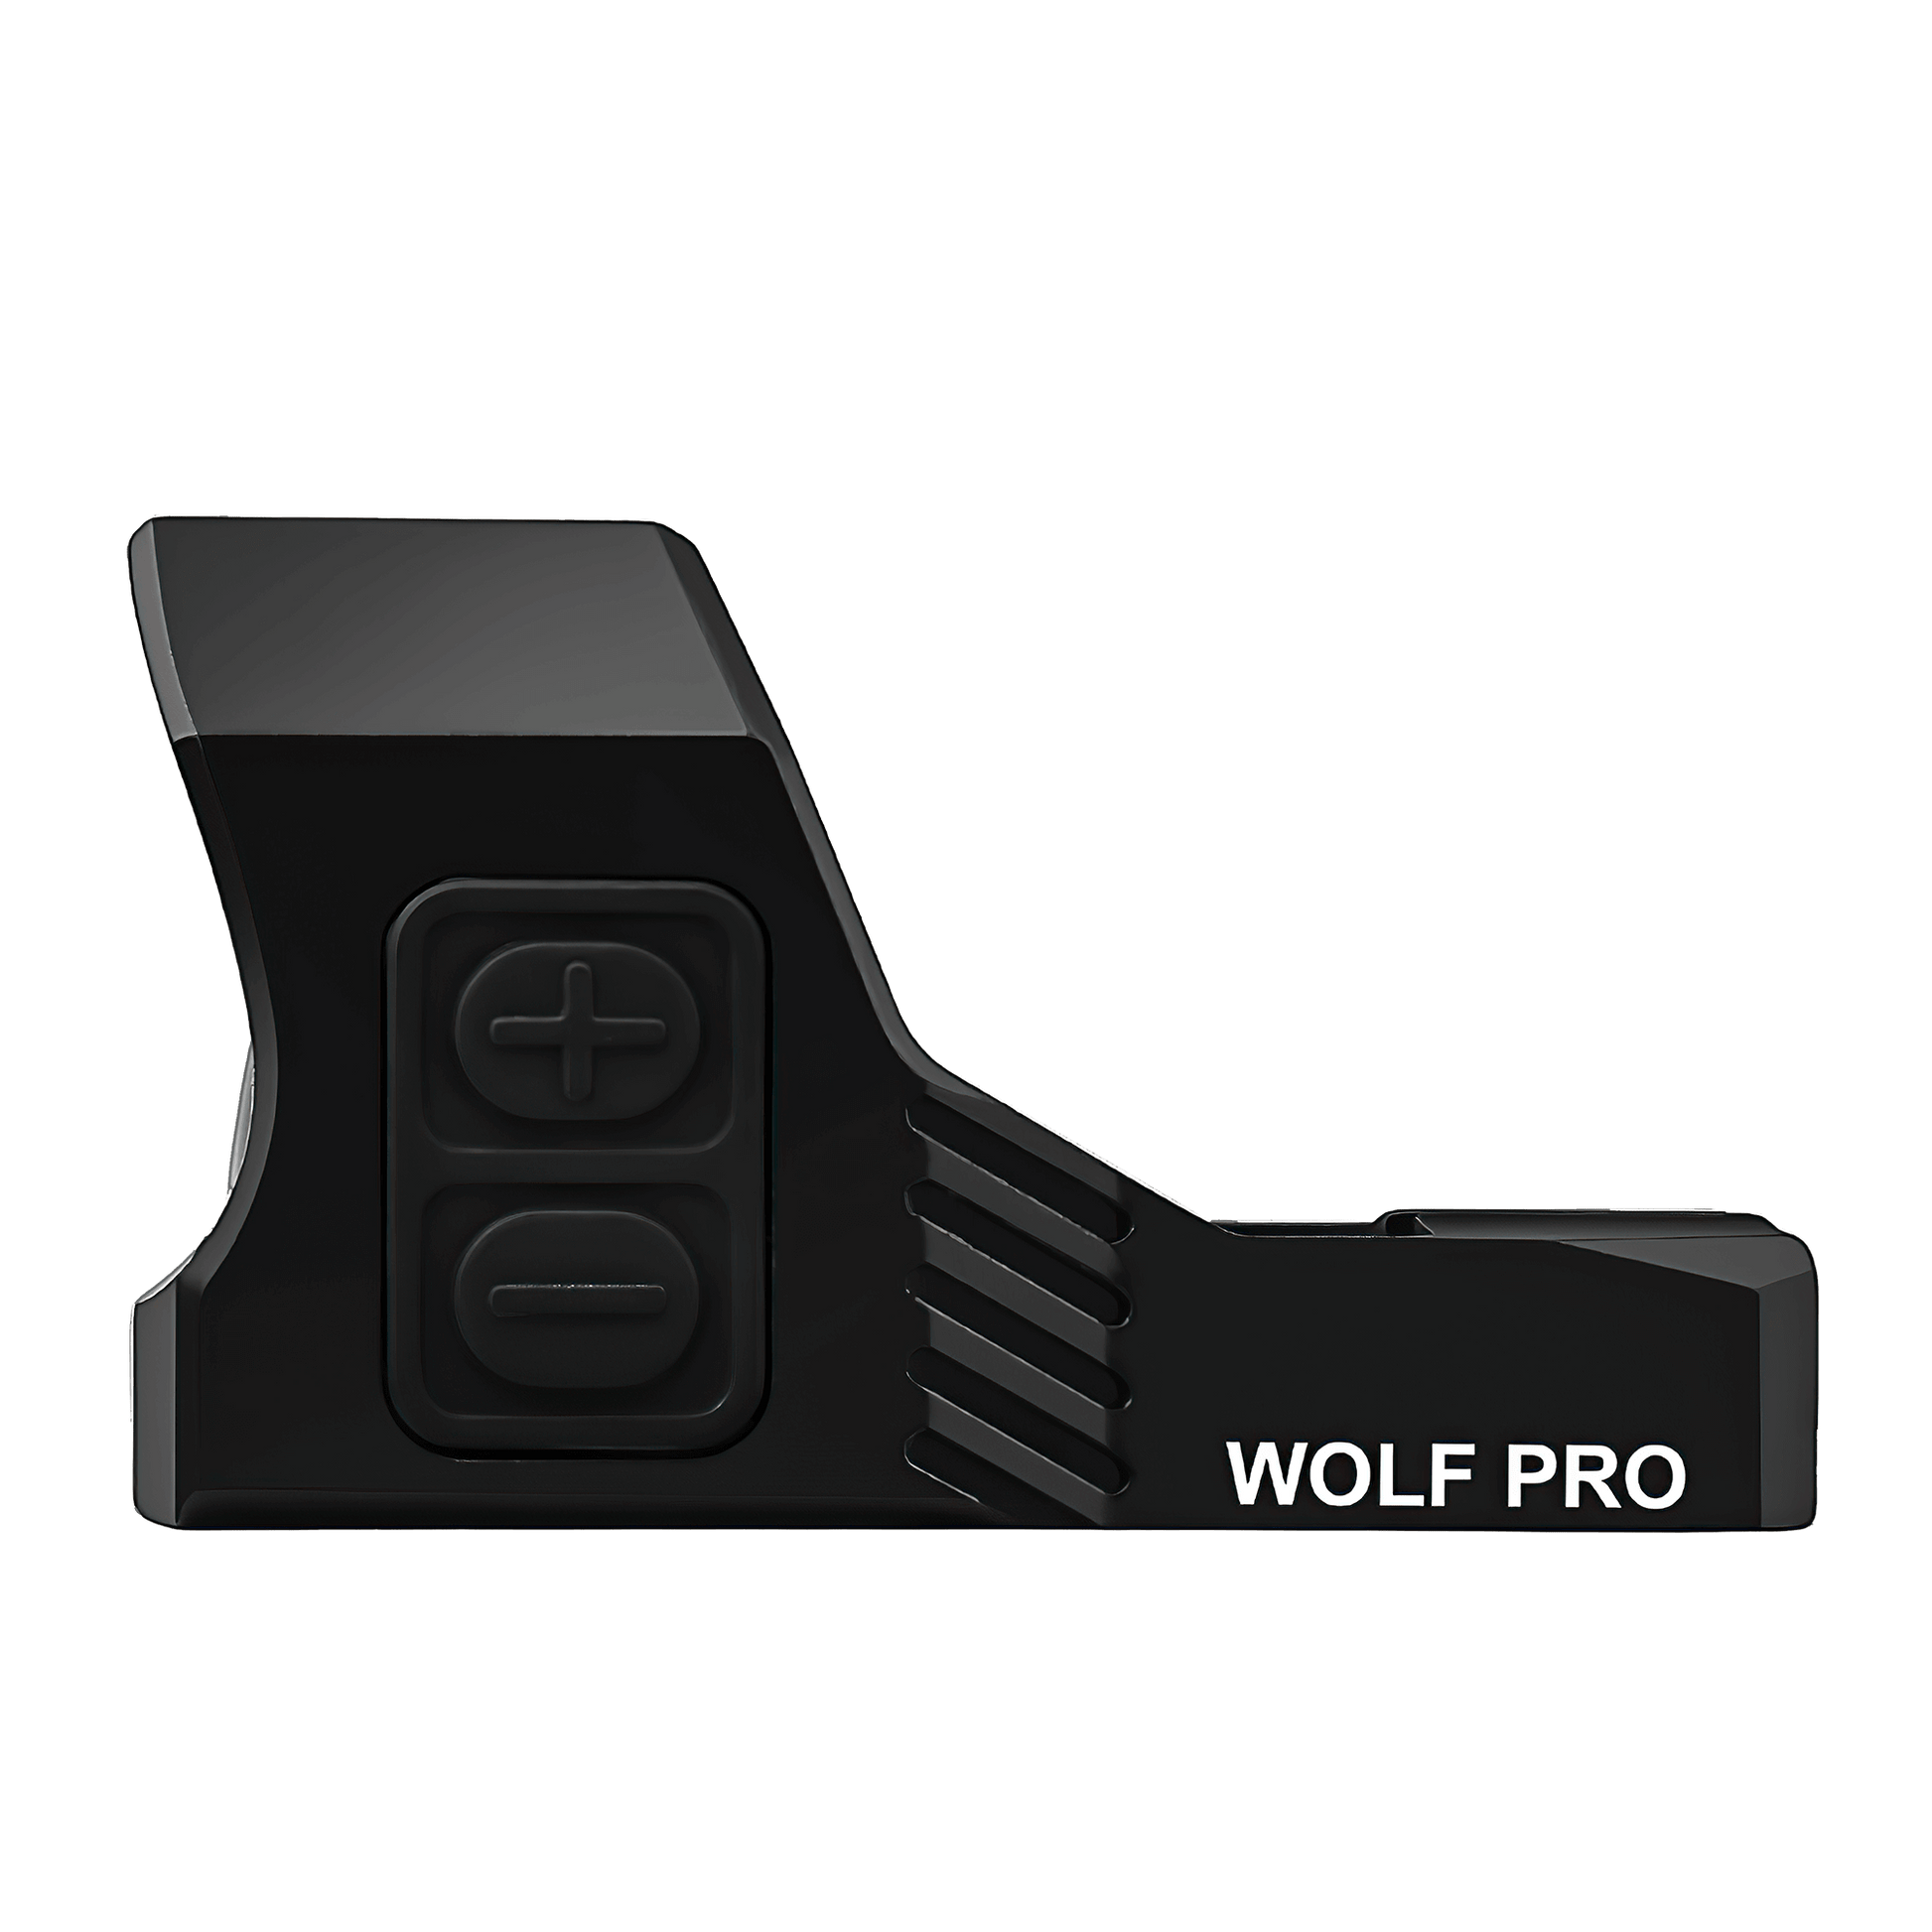 a black object with the word wolf pro written on it